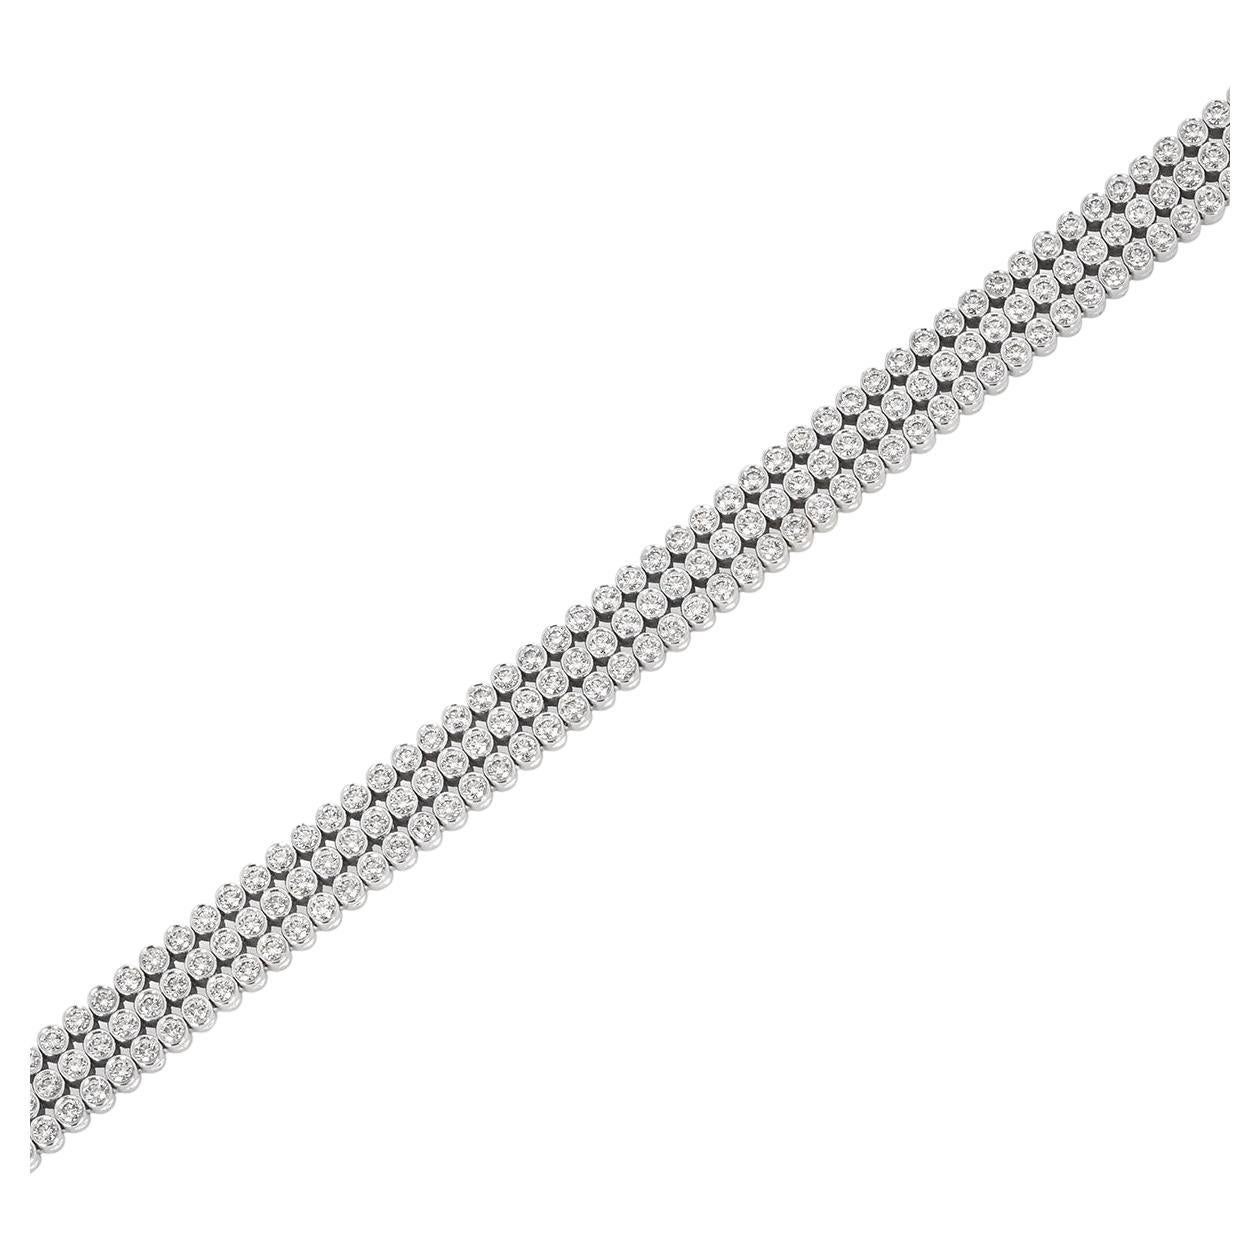 A dazzling platinum diamond line bracelet by Tiffany & Co. from the Jazz collection. The three-row bracelet features 201 round brilliant cut diamonds bezel set throughout with an approximate total weight of 6.03ct, F-G colour and VS clarity. The 7mm